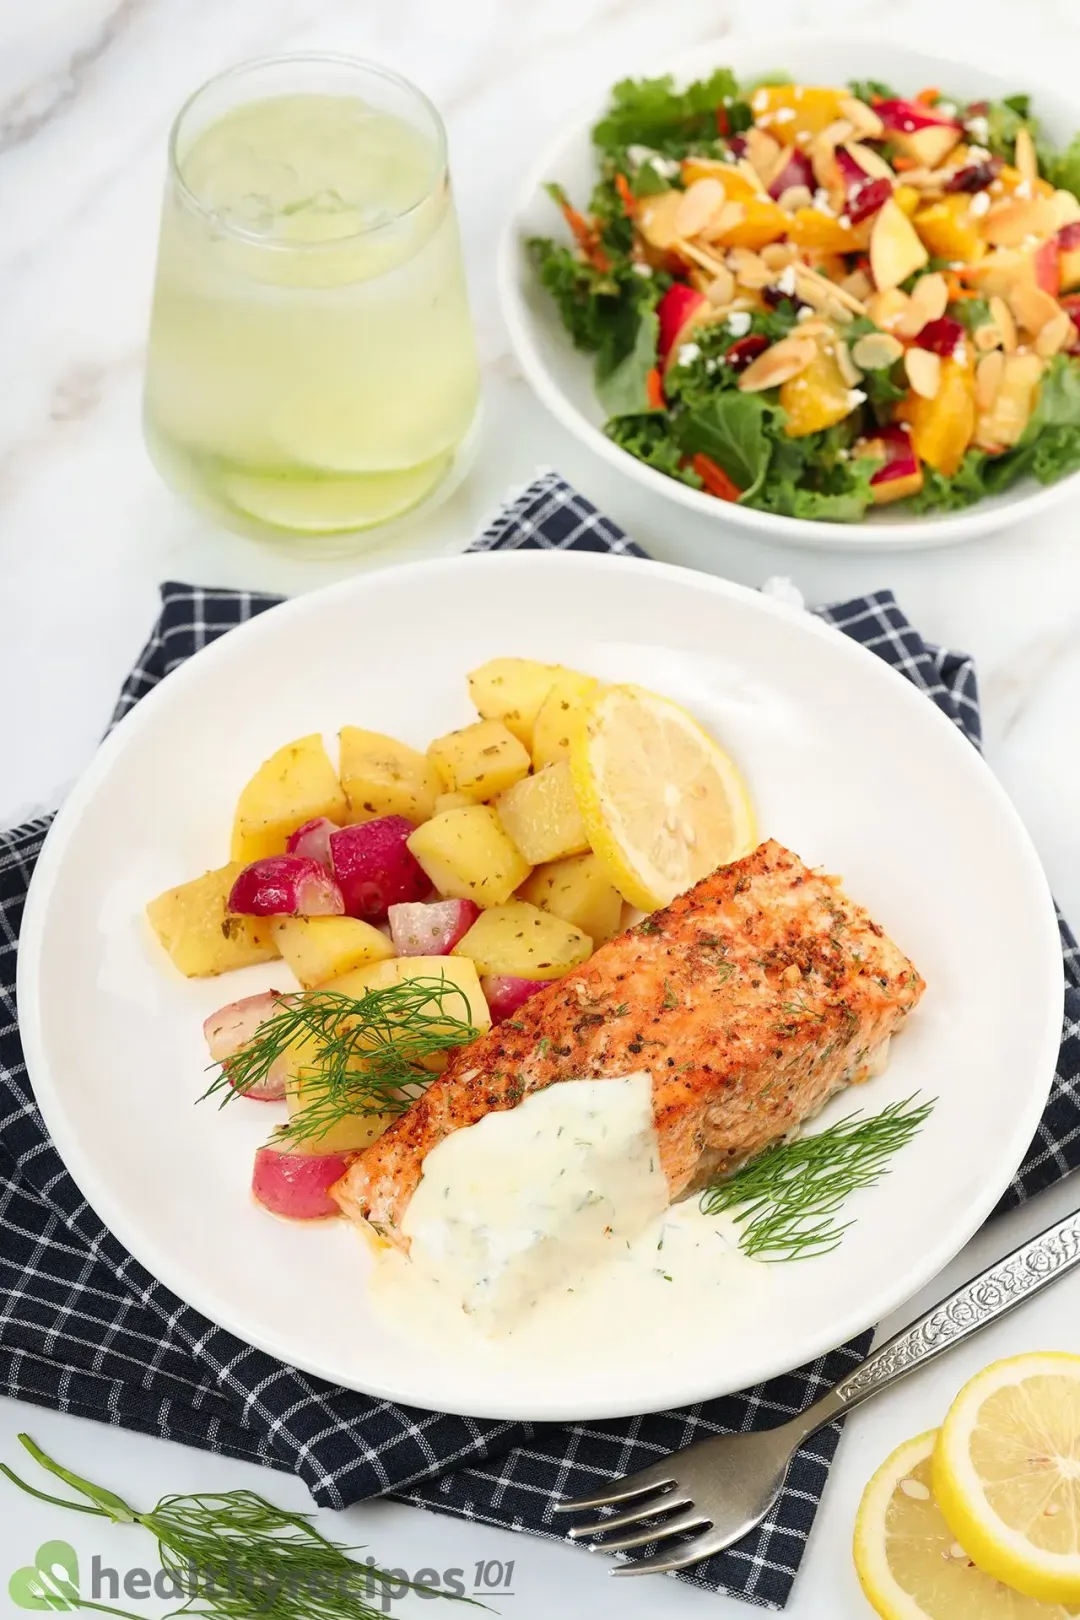 A of baked salmon, potato cubes, radish cubes, and fresh dill laid on top of a blue tablecloth and near a plate of salad, a glass of lemon juice, and a fork